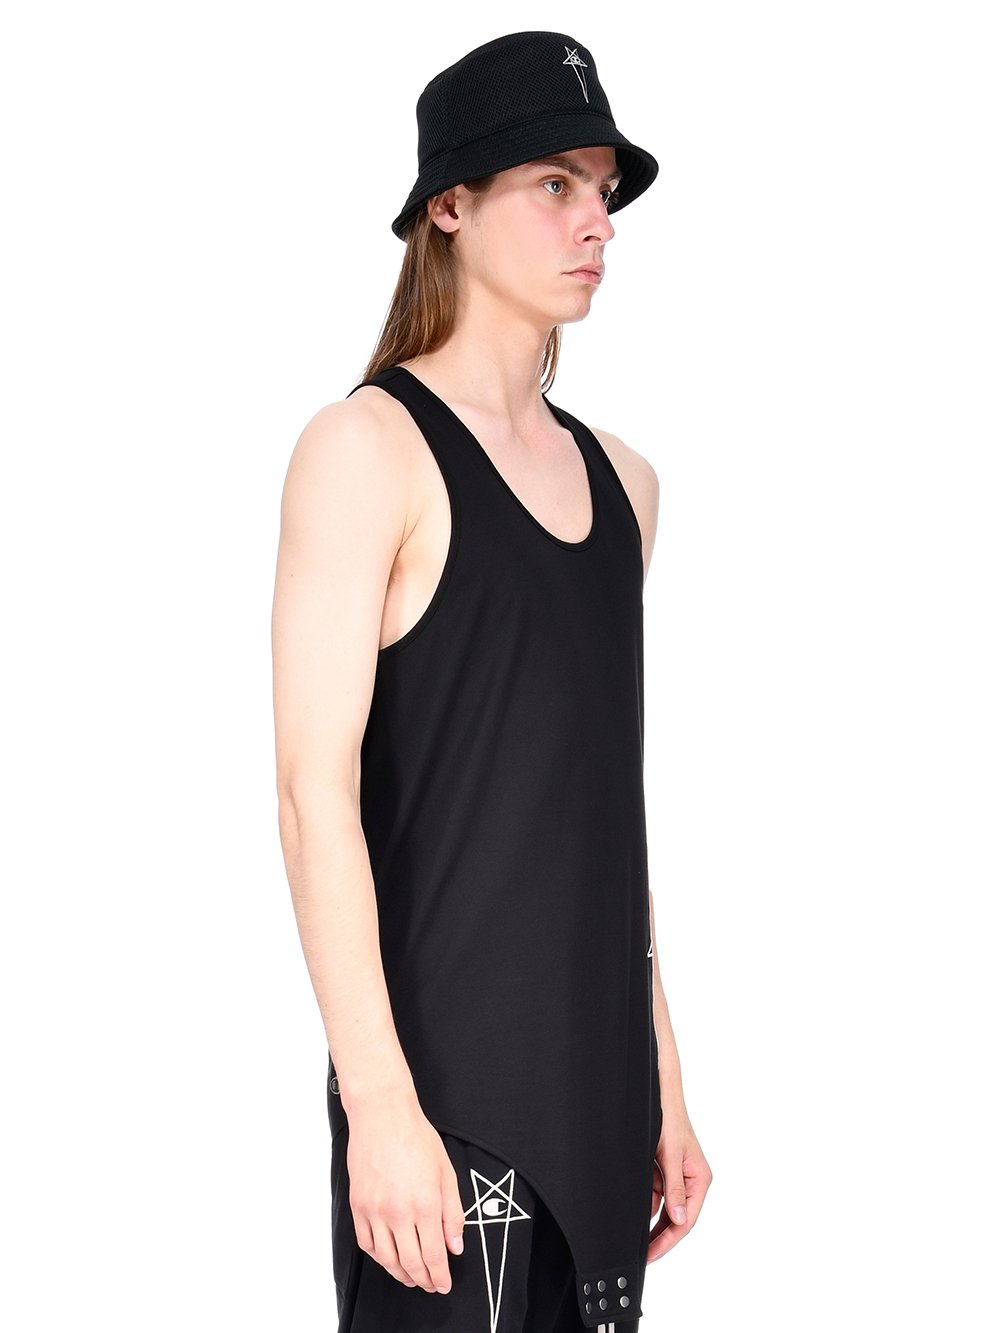 CHAMPION X RICK OWENS GILLIGAN HAT IN BLACK RECYCLED 3D MESH